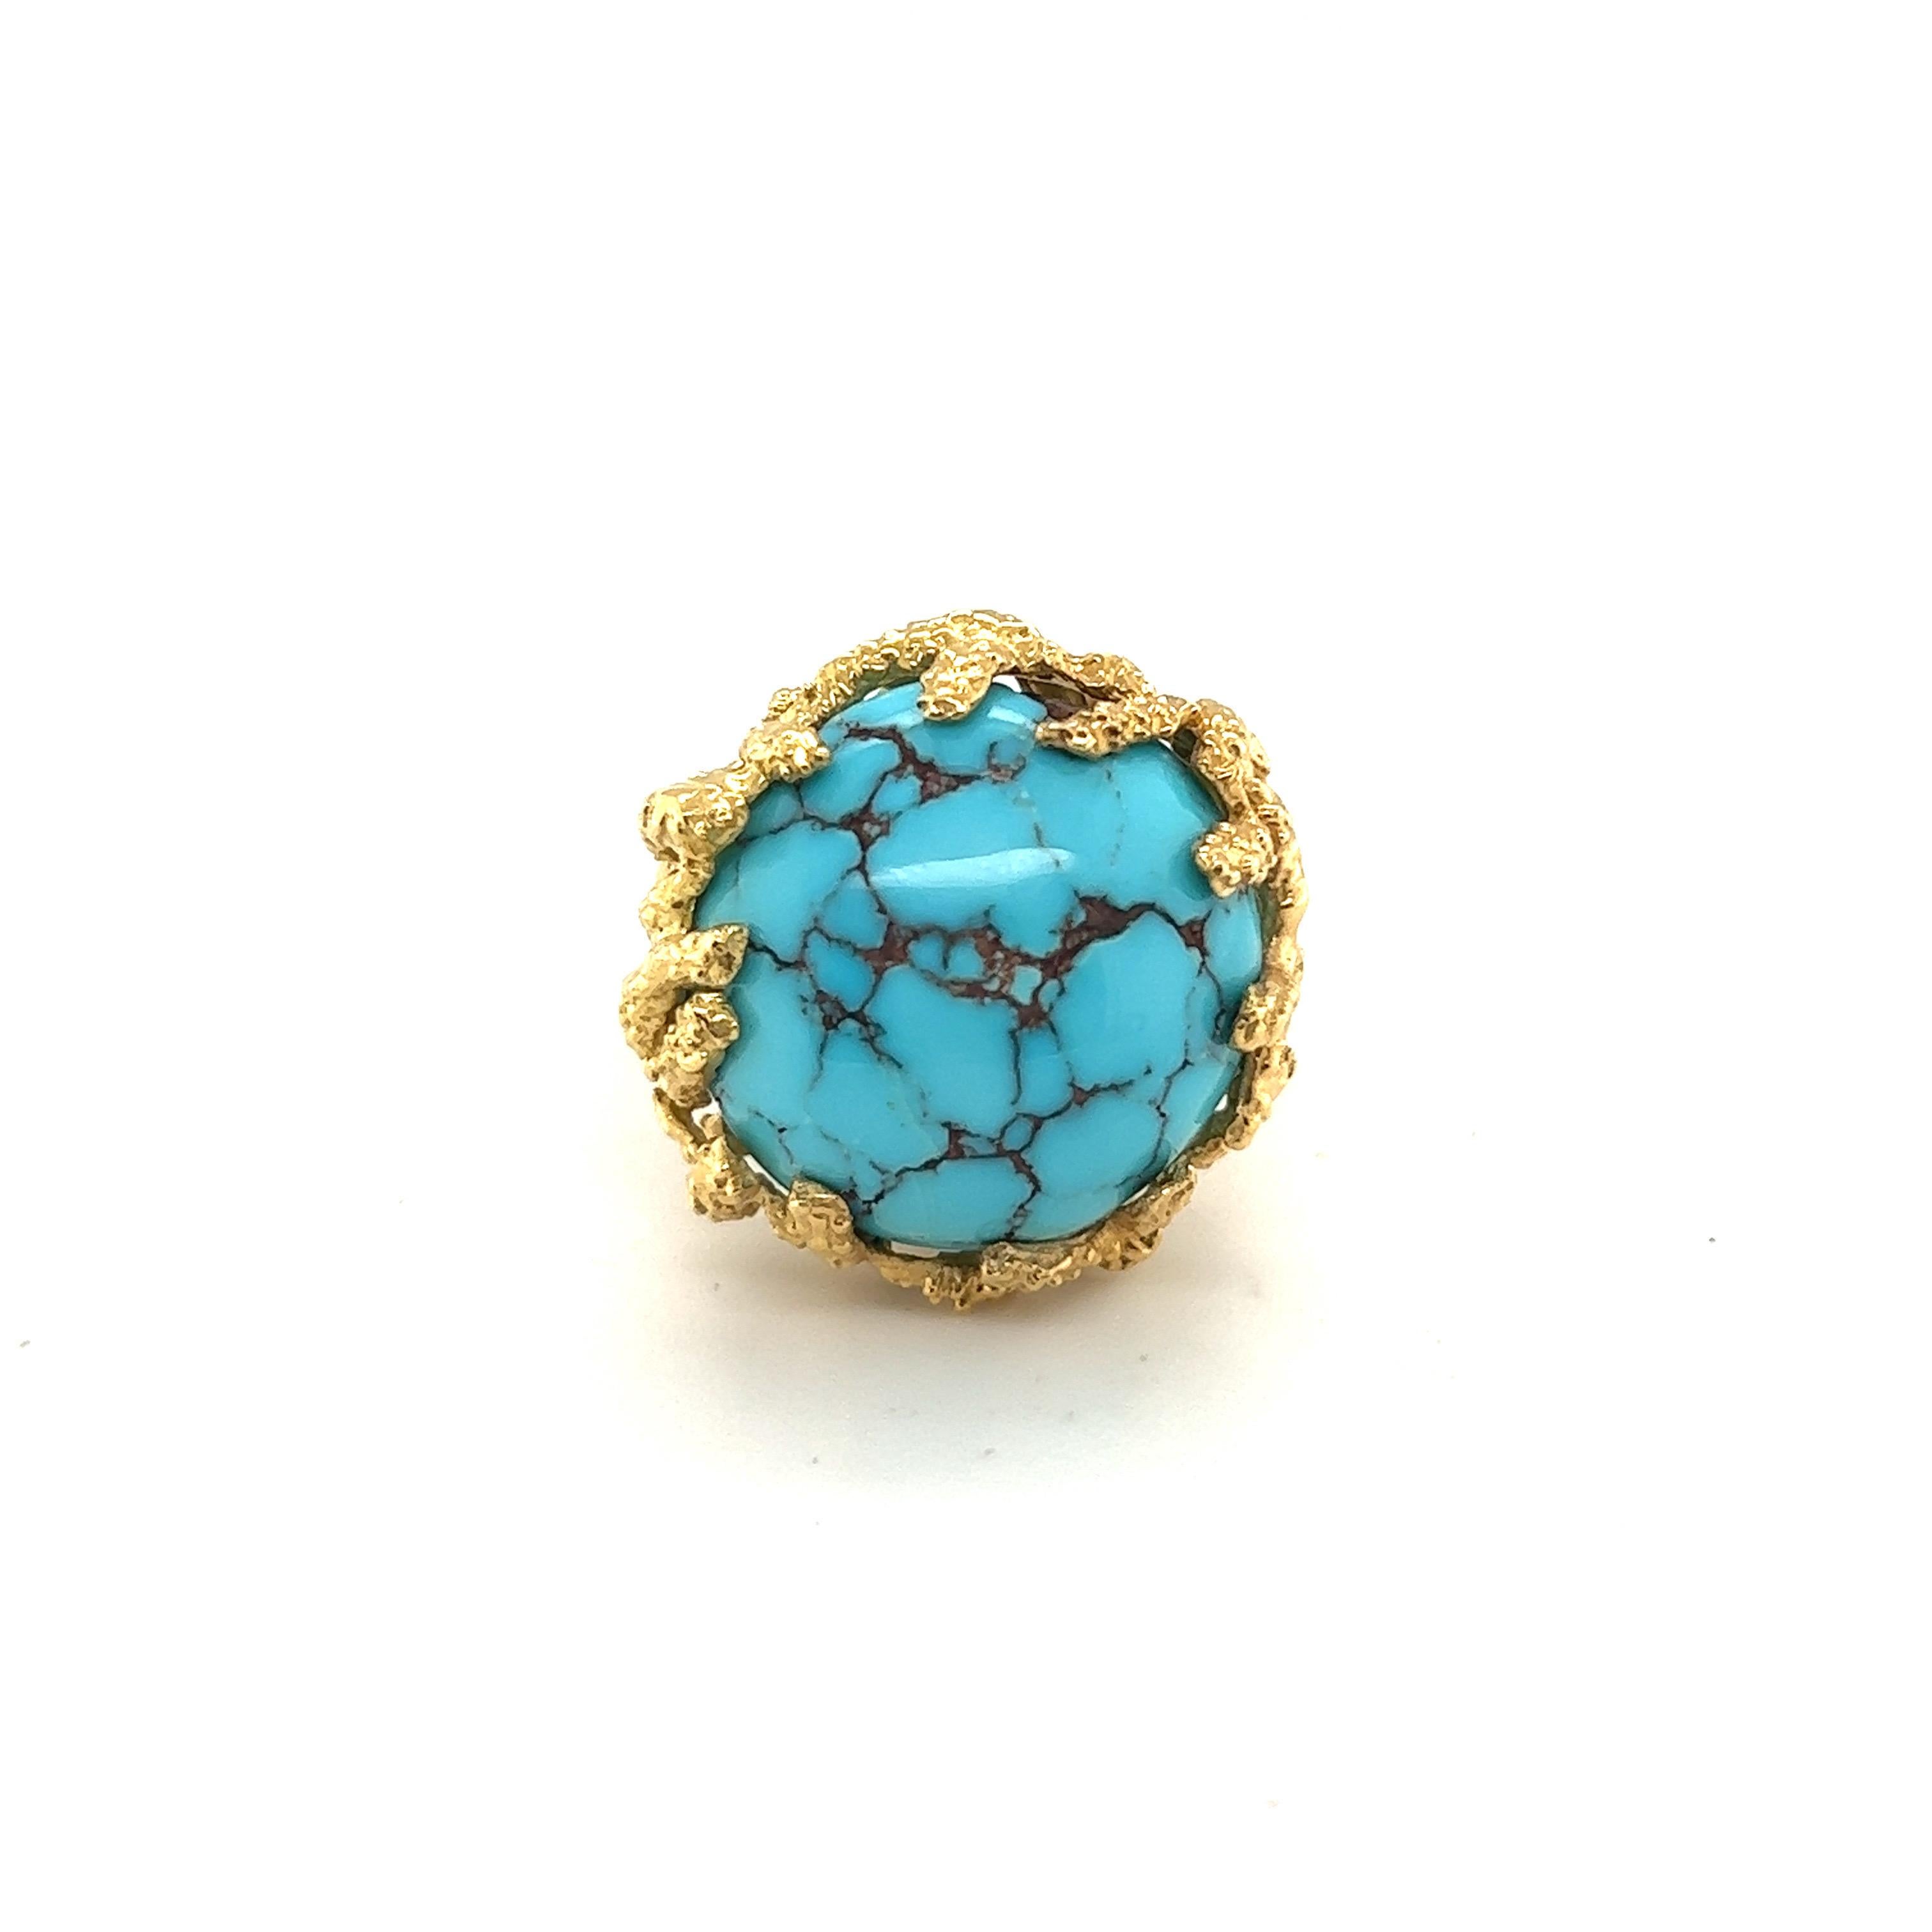 Glamorous and ladylike 18 karat yellow gold and turquoise cocktail ring from the 1960s. 

Crafted in 18 karat yellow gold, this eye-catching ring is set with a turquoise cabochon of circa 1.7 cm / 0.67 inch diameter. The structured appearance of the